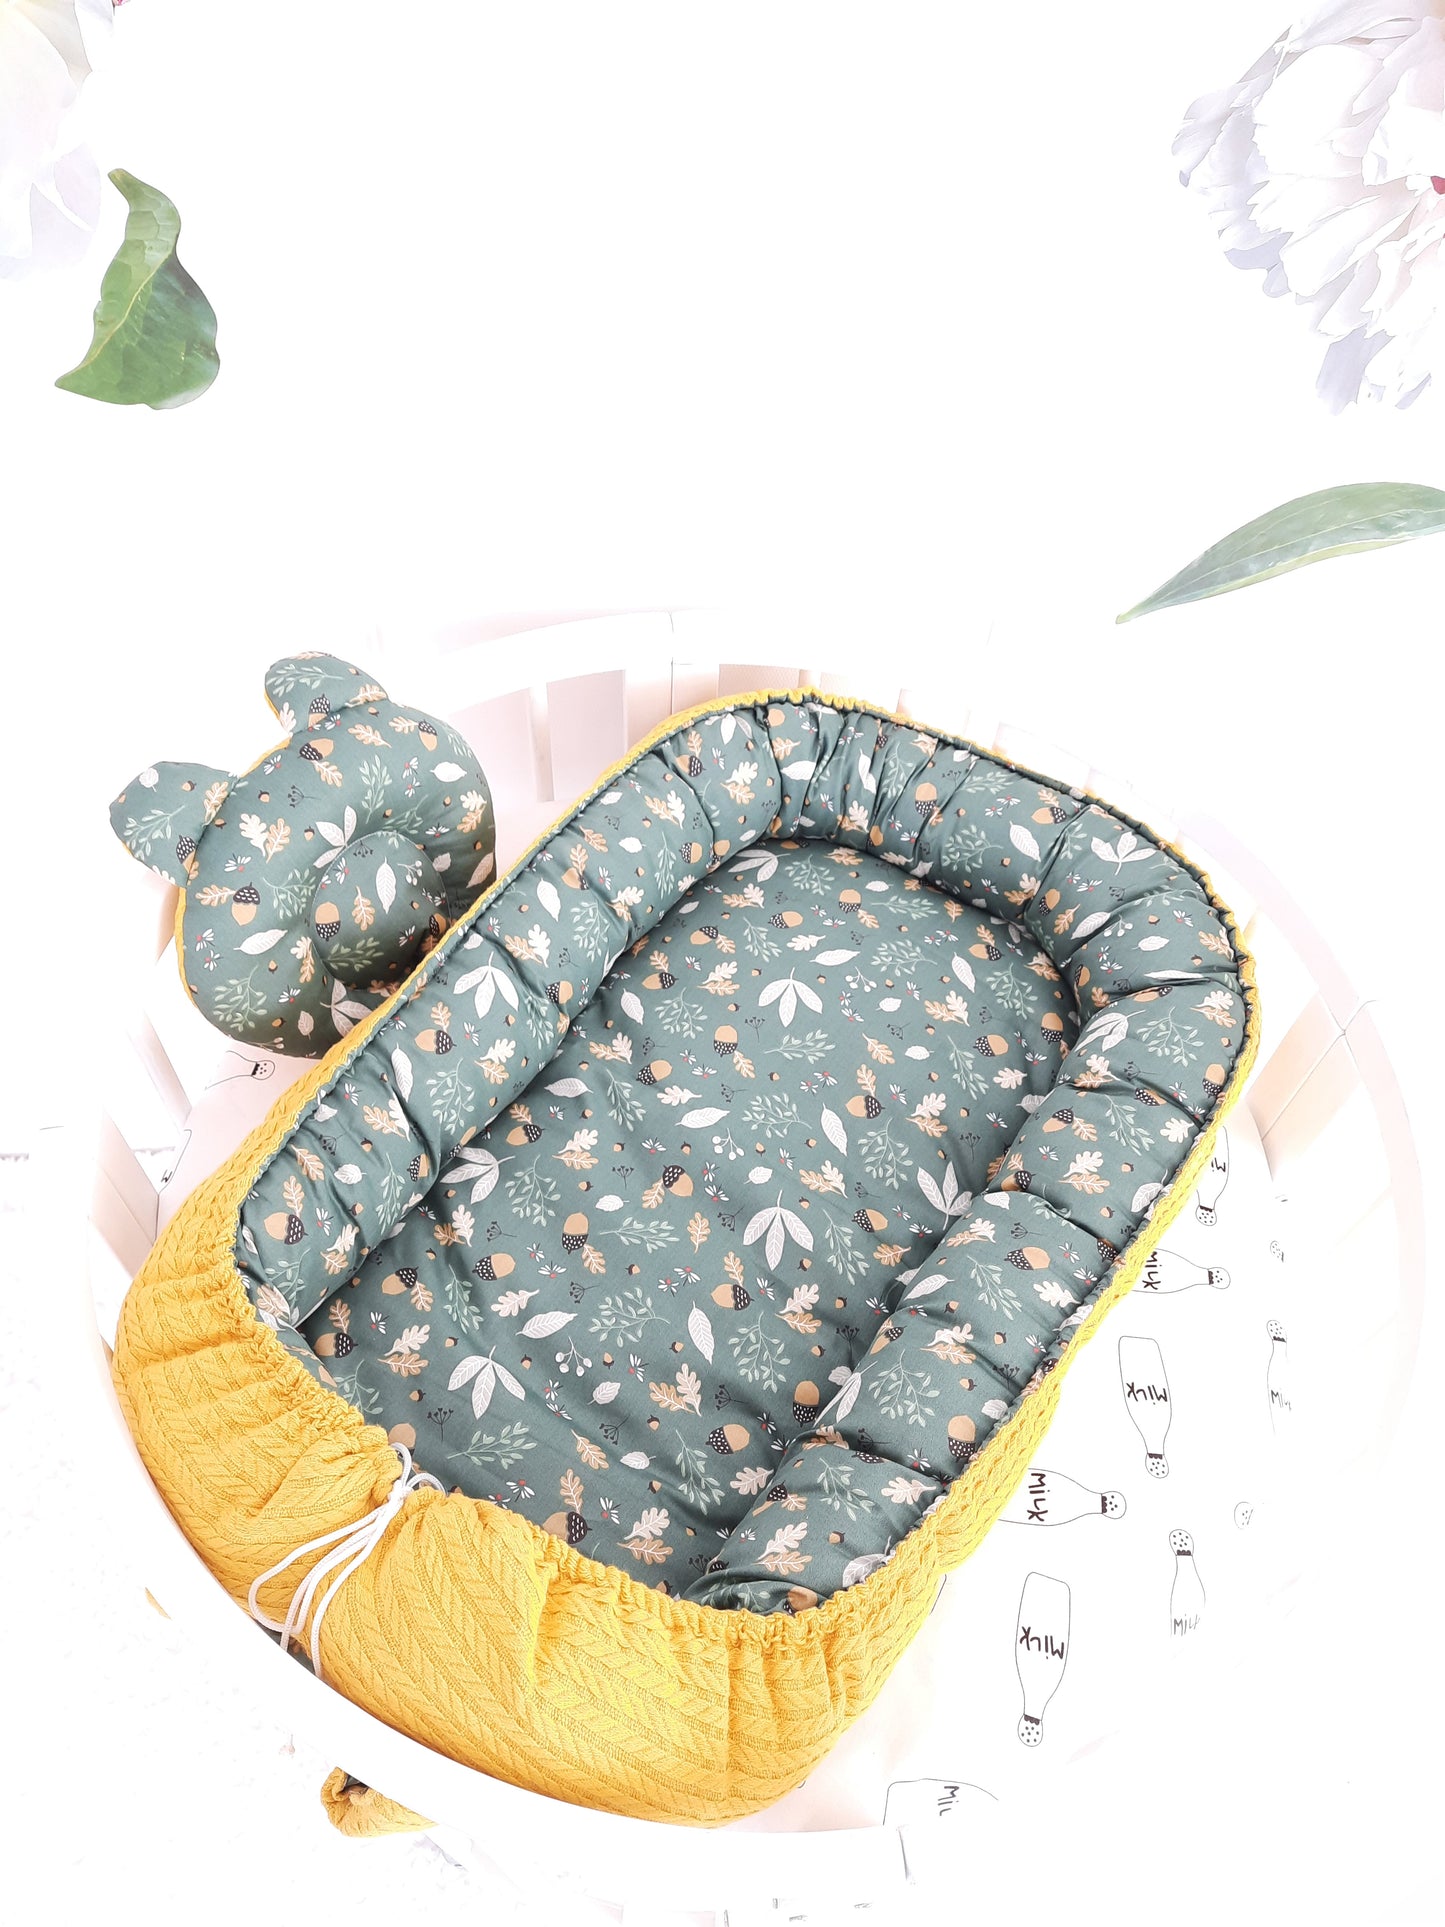 Large Baby Nest Bed 